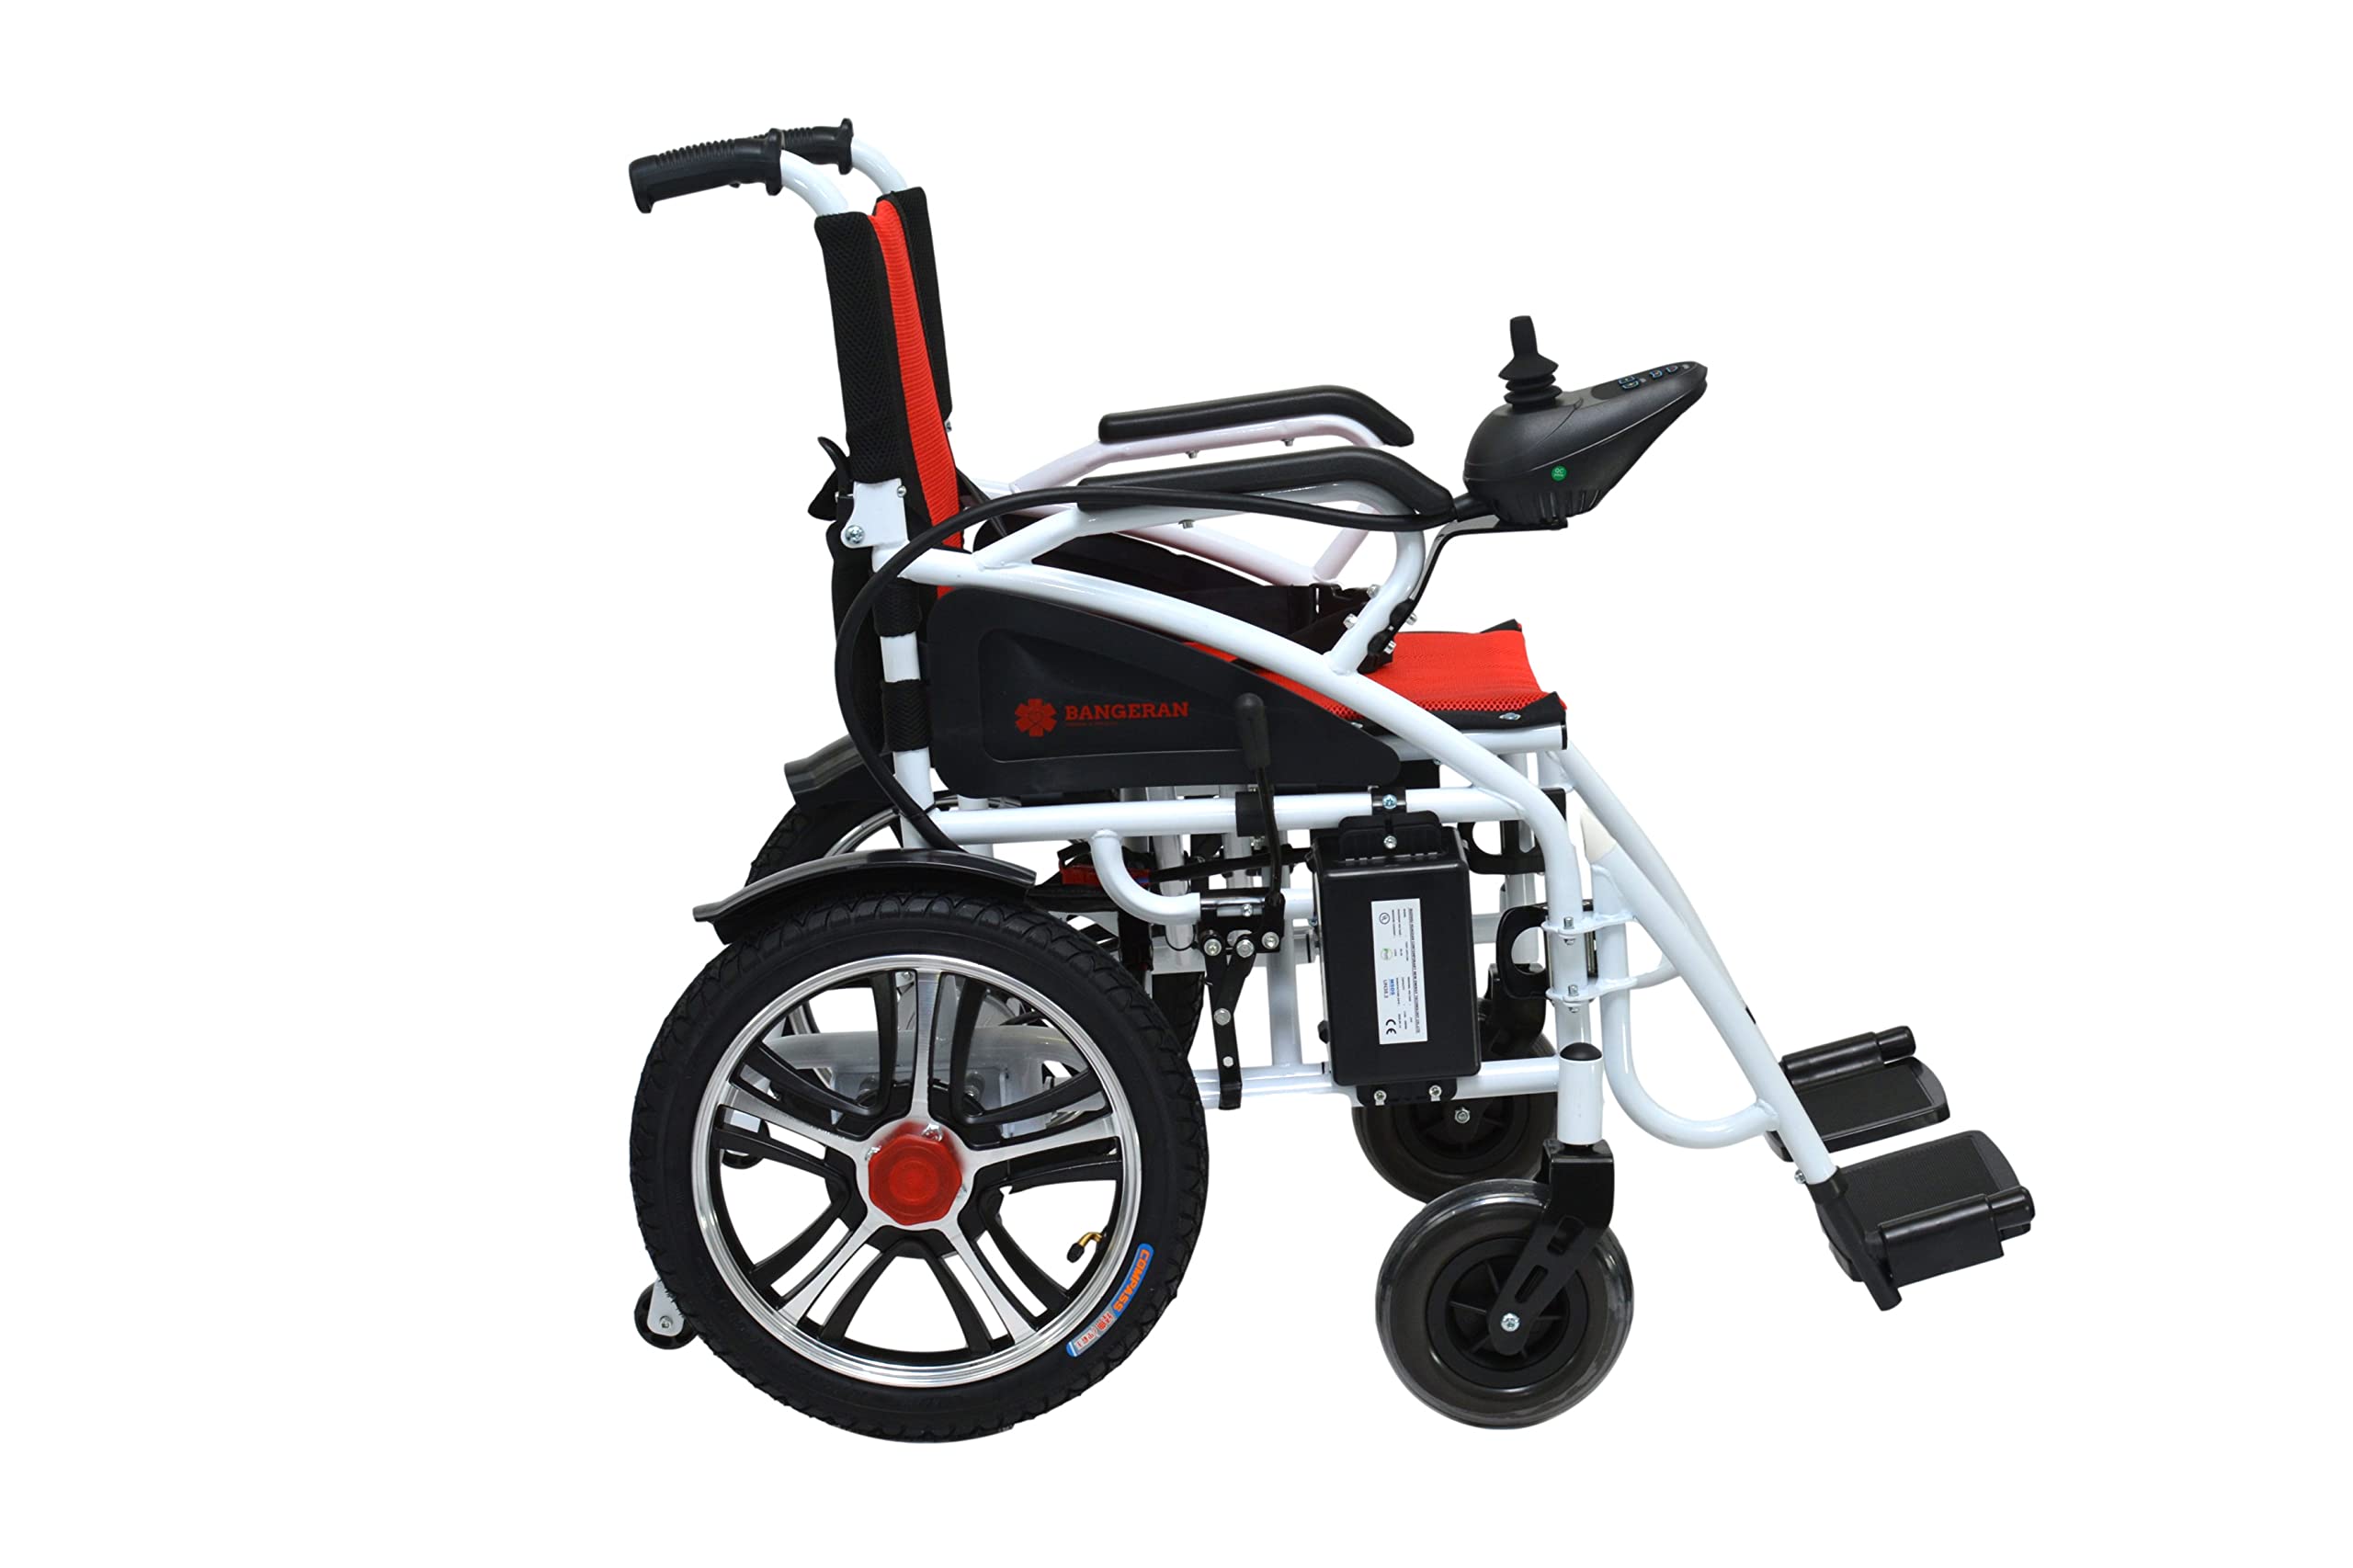 Mobilitas Z Foldable, Compact, Portable Electric Wheelchair for Adults and Seniors, Lightweight Power Wheelchair in Affordable Category, Silla de Ruedas Electrica, Dual Motor (White on Red)